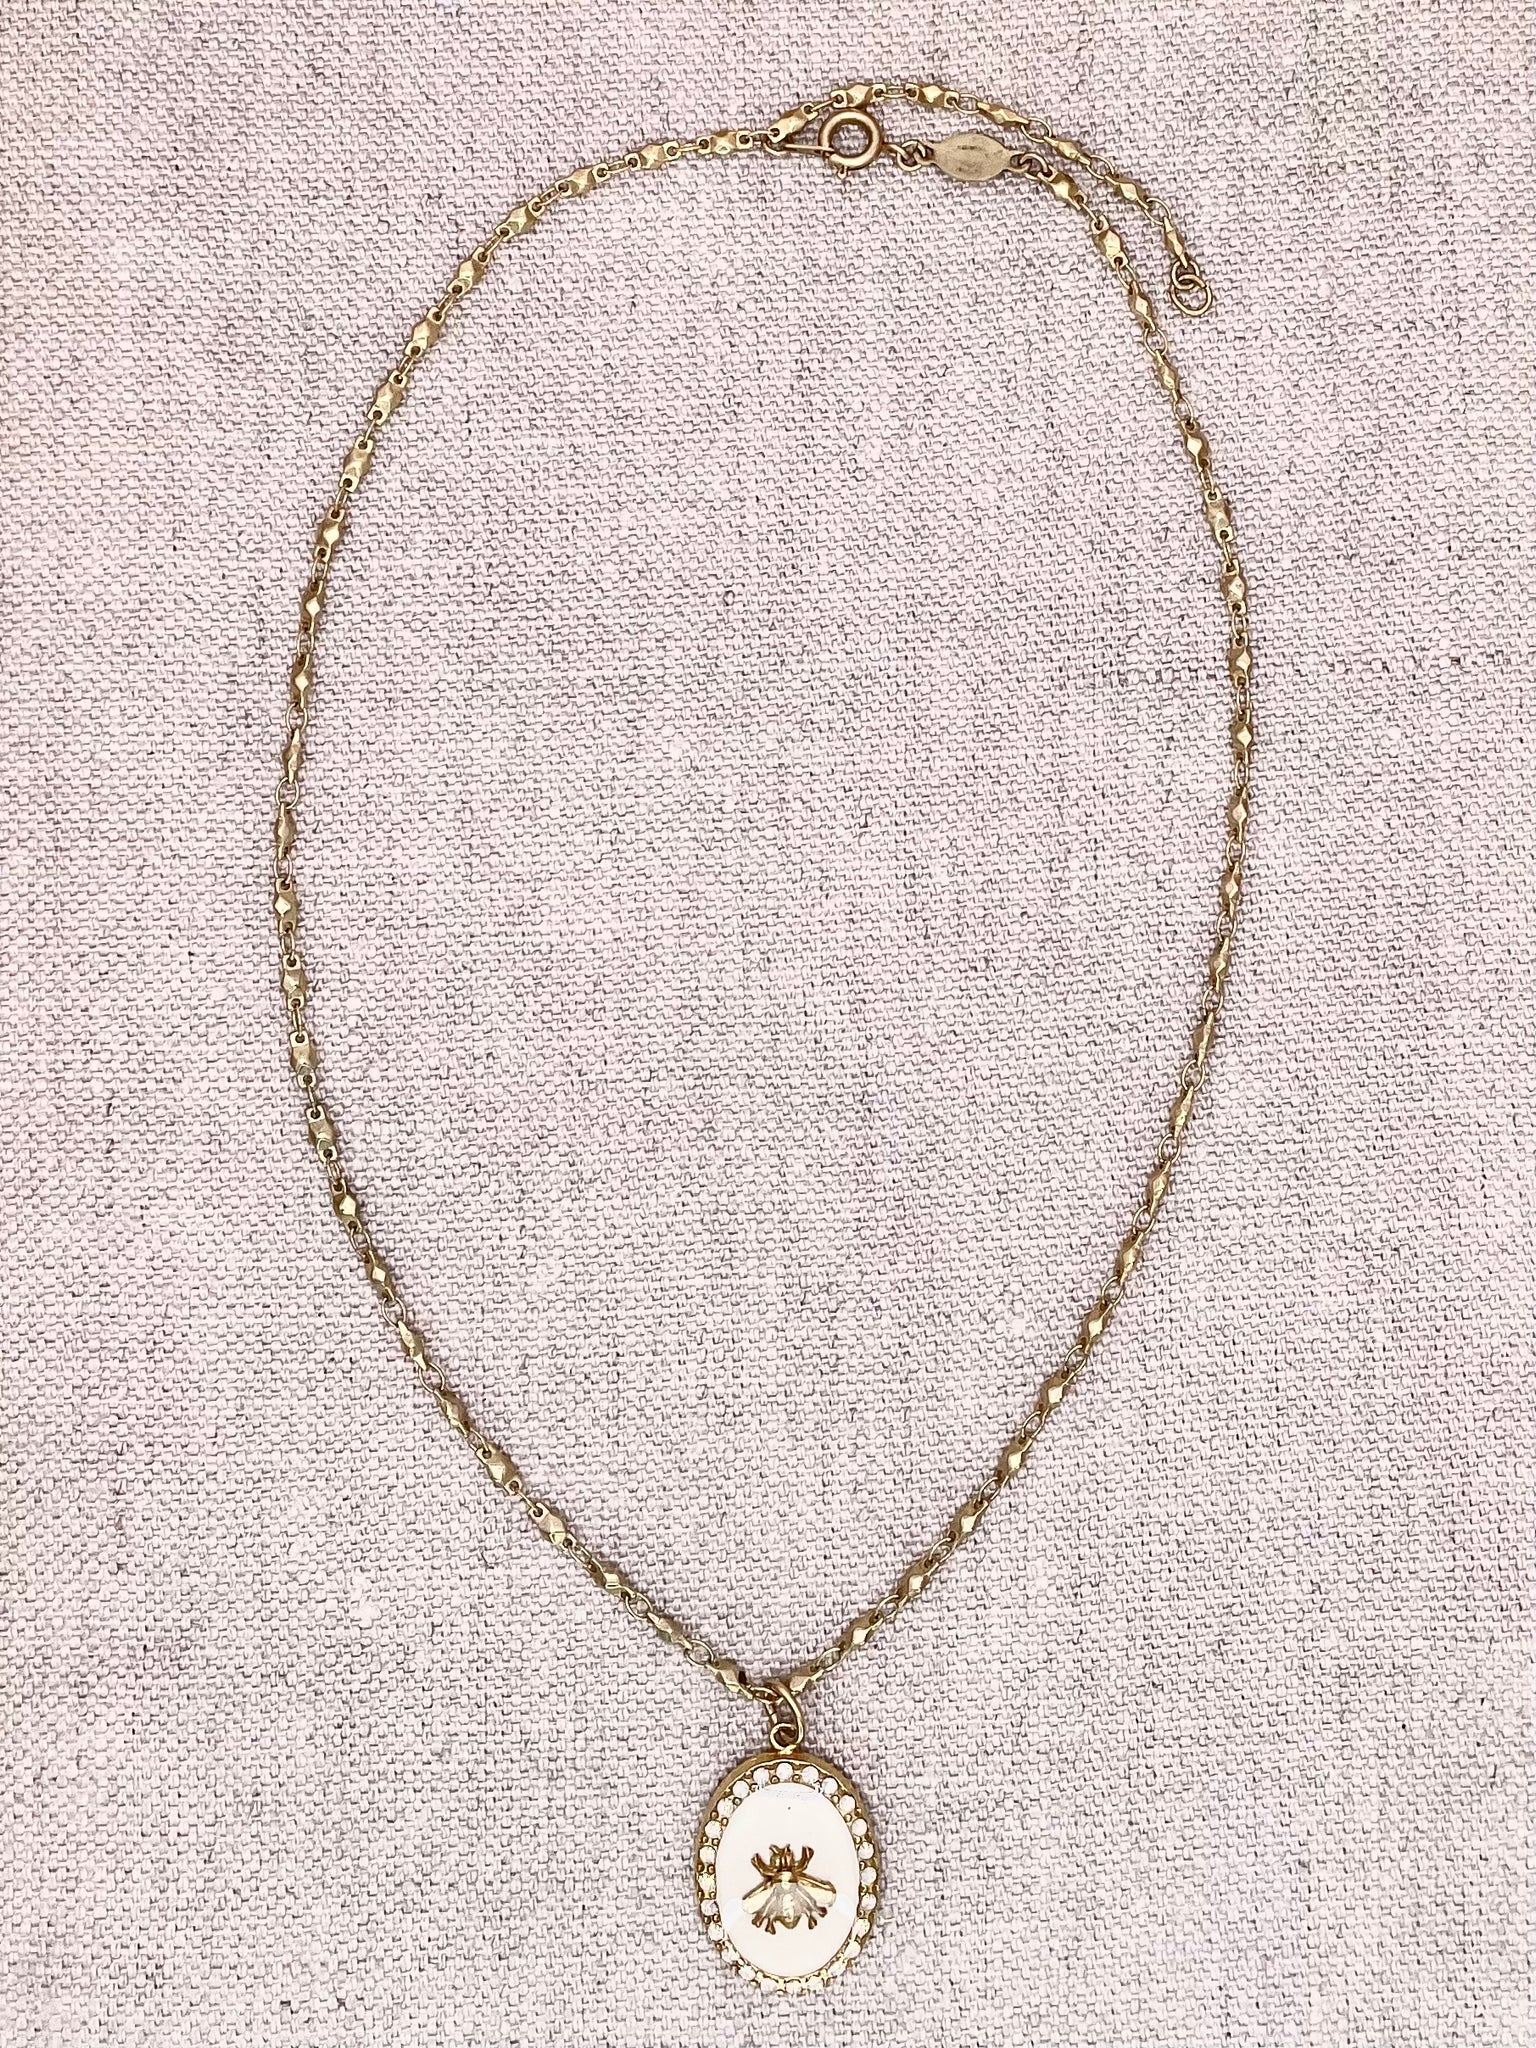 Sylvie Necklace - Gold with White